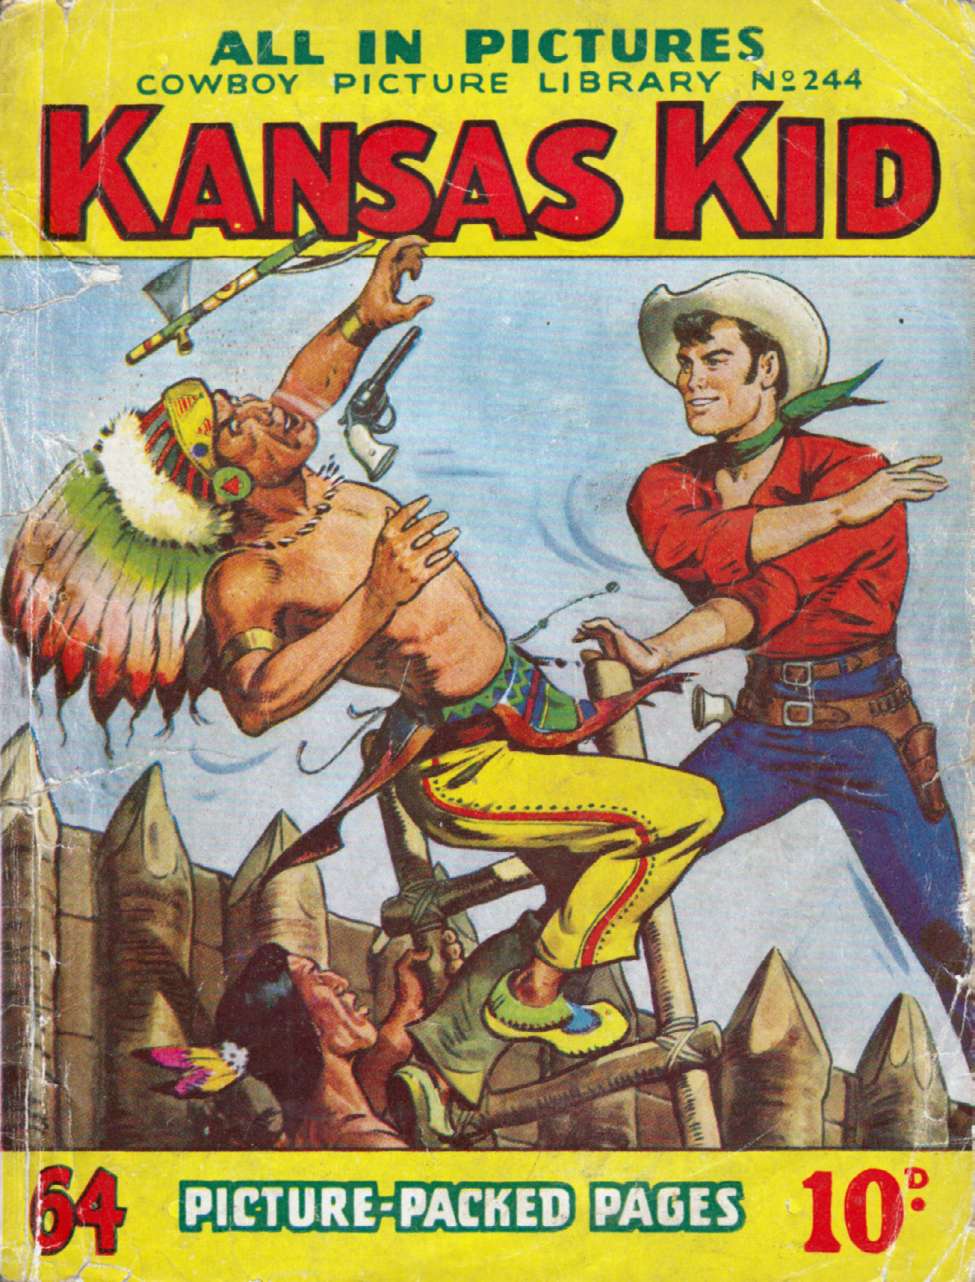 Book Cover For Cowboy Picture Library 244